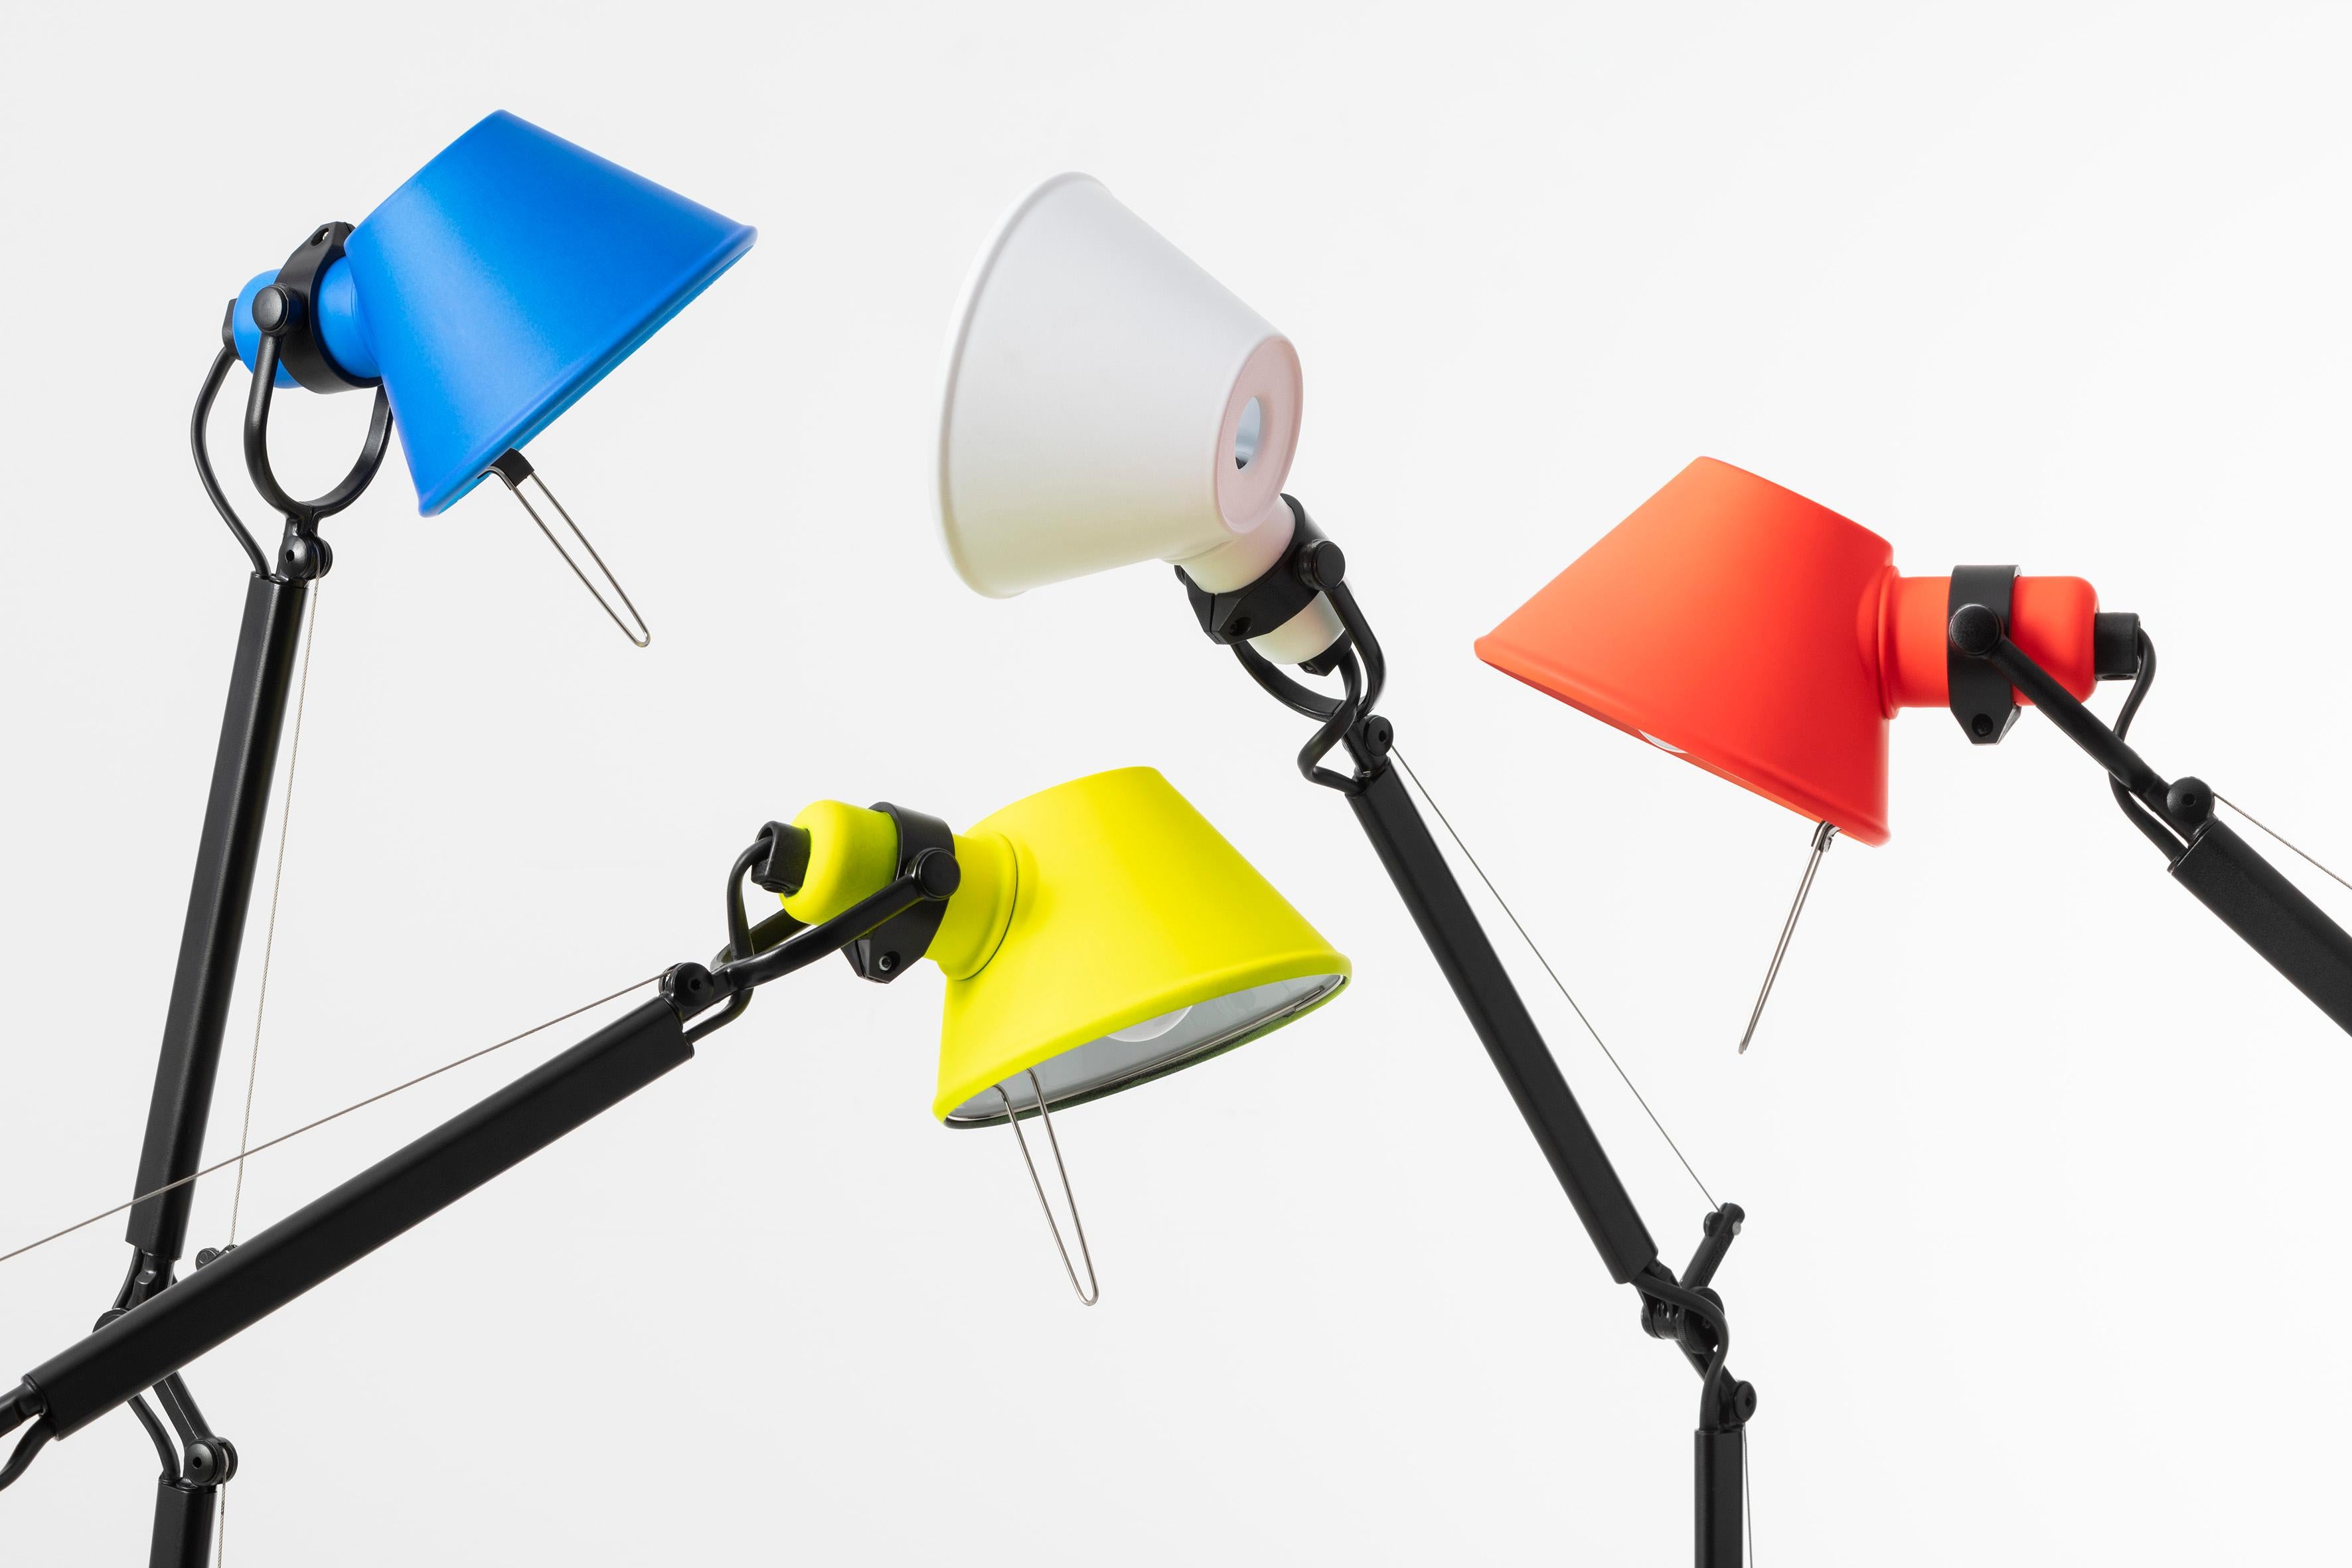 “I designed the Tolomeo in 1986. Perhaps I ought to say that I invented it, as in point of fact the idea for a new mechanism came before the lamp was created.” Michele De Lucchi. The iconic Tolomeo lamp is now available in vibrant pops of color.